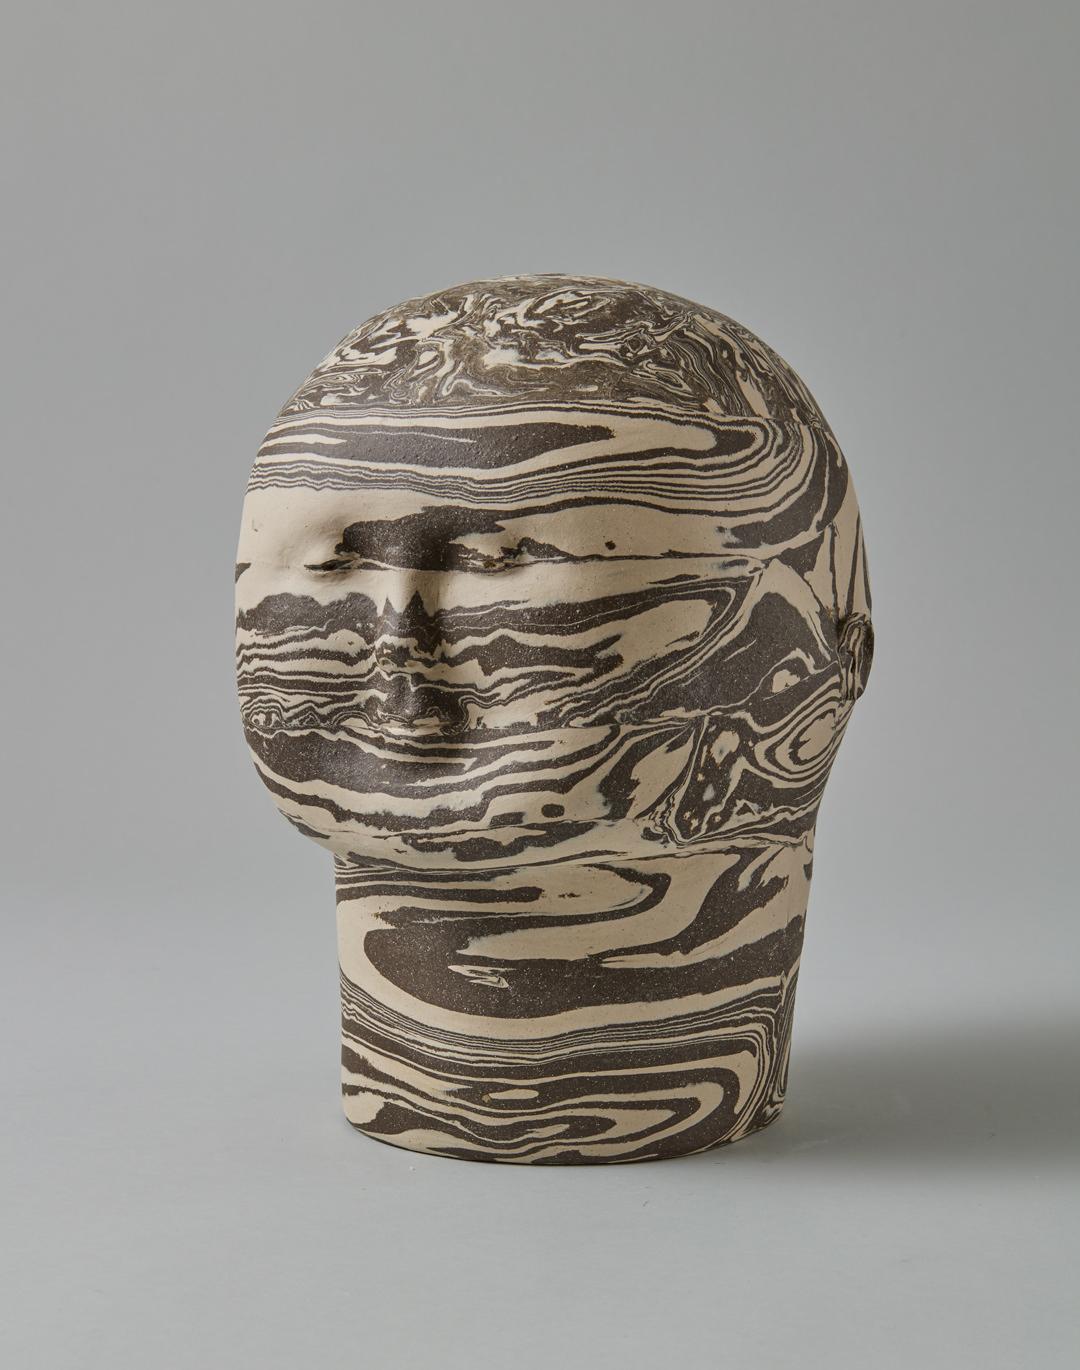 Maybe She's Not a Straight On Type of Gal, Marbled Ceramic Head, 21st Century